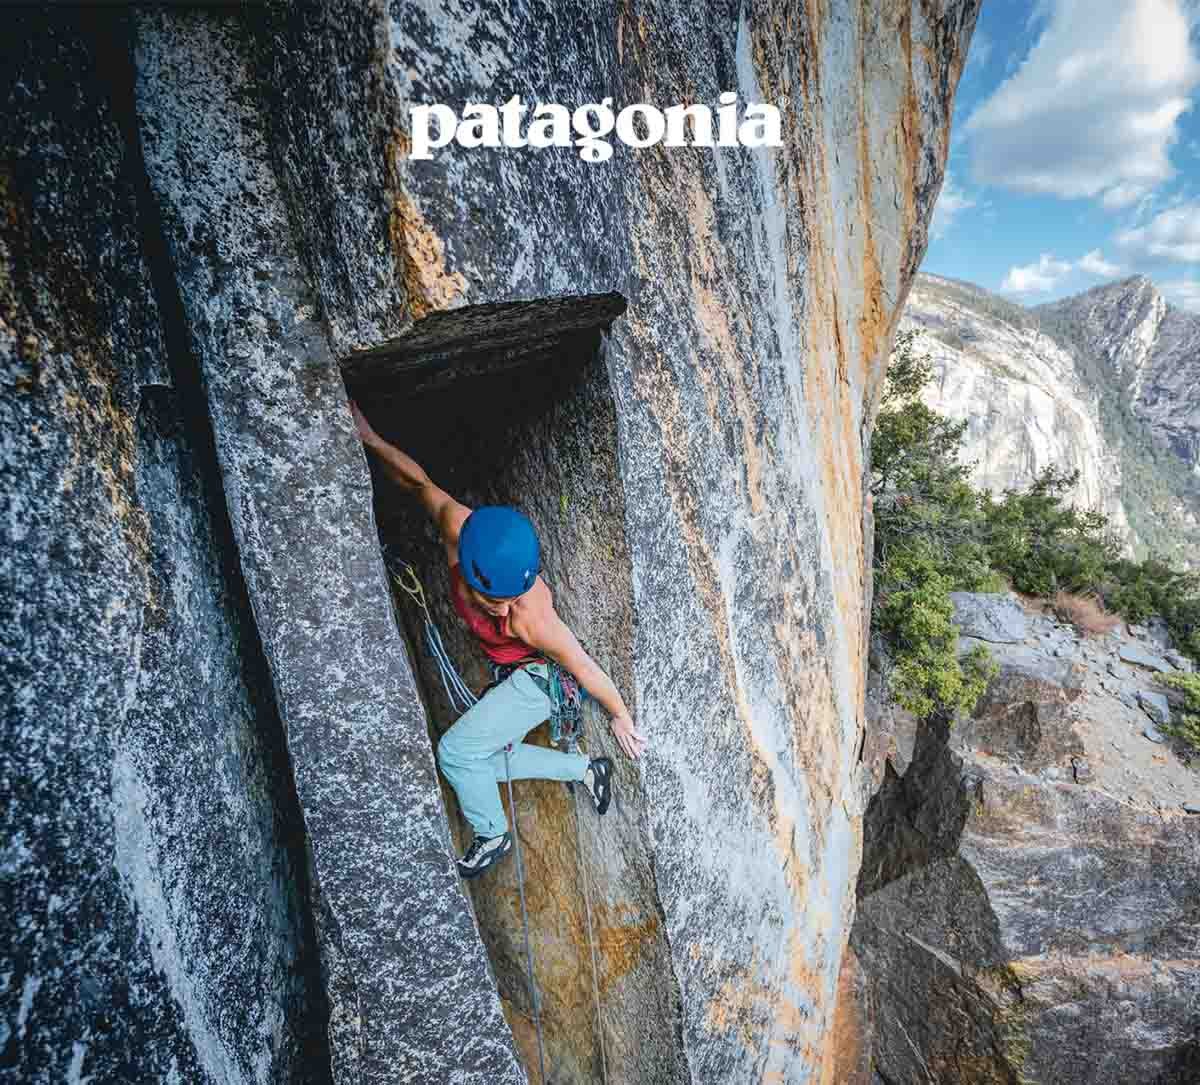 Patagonia. We’re on a tear. 